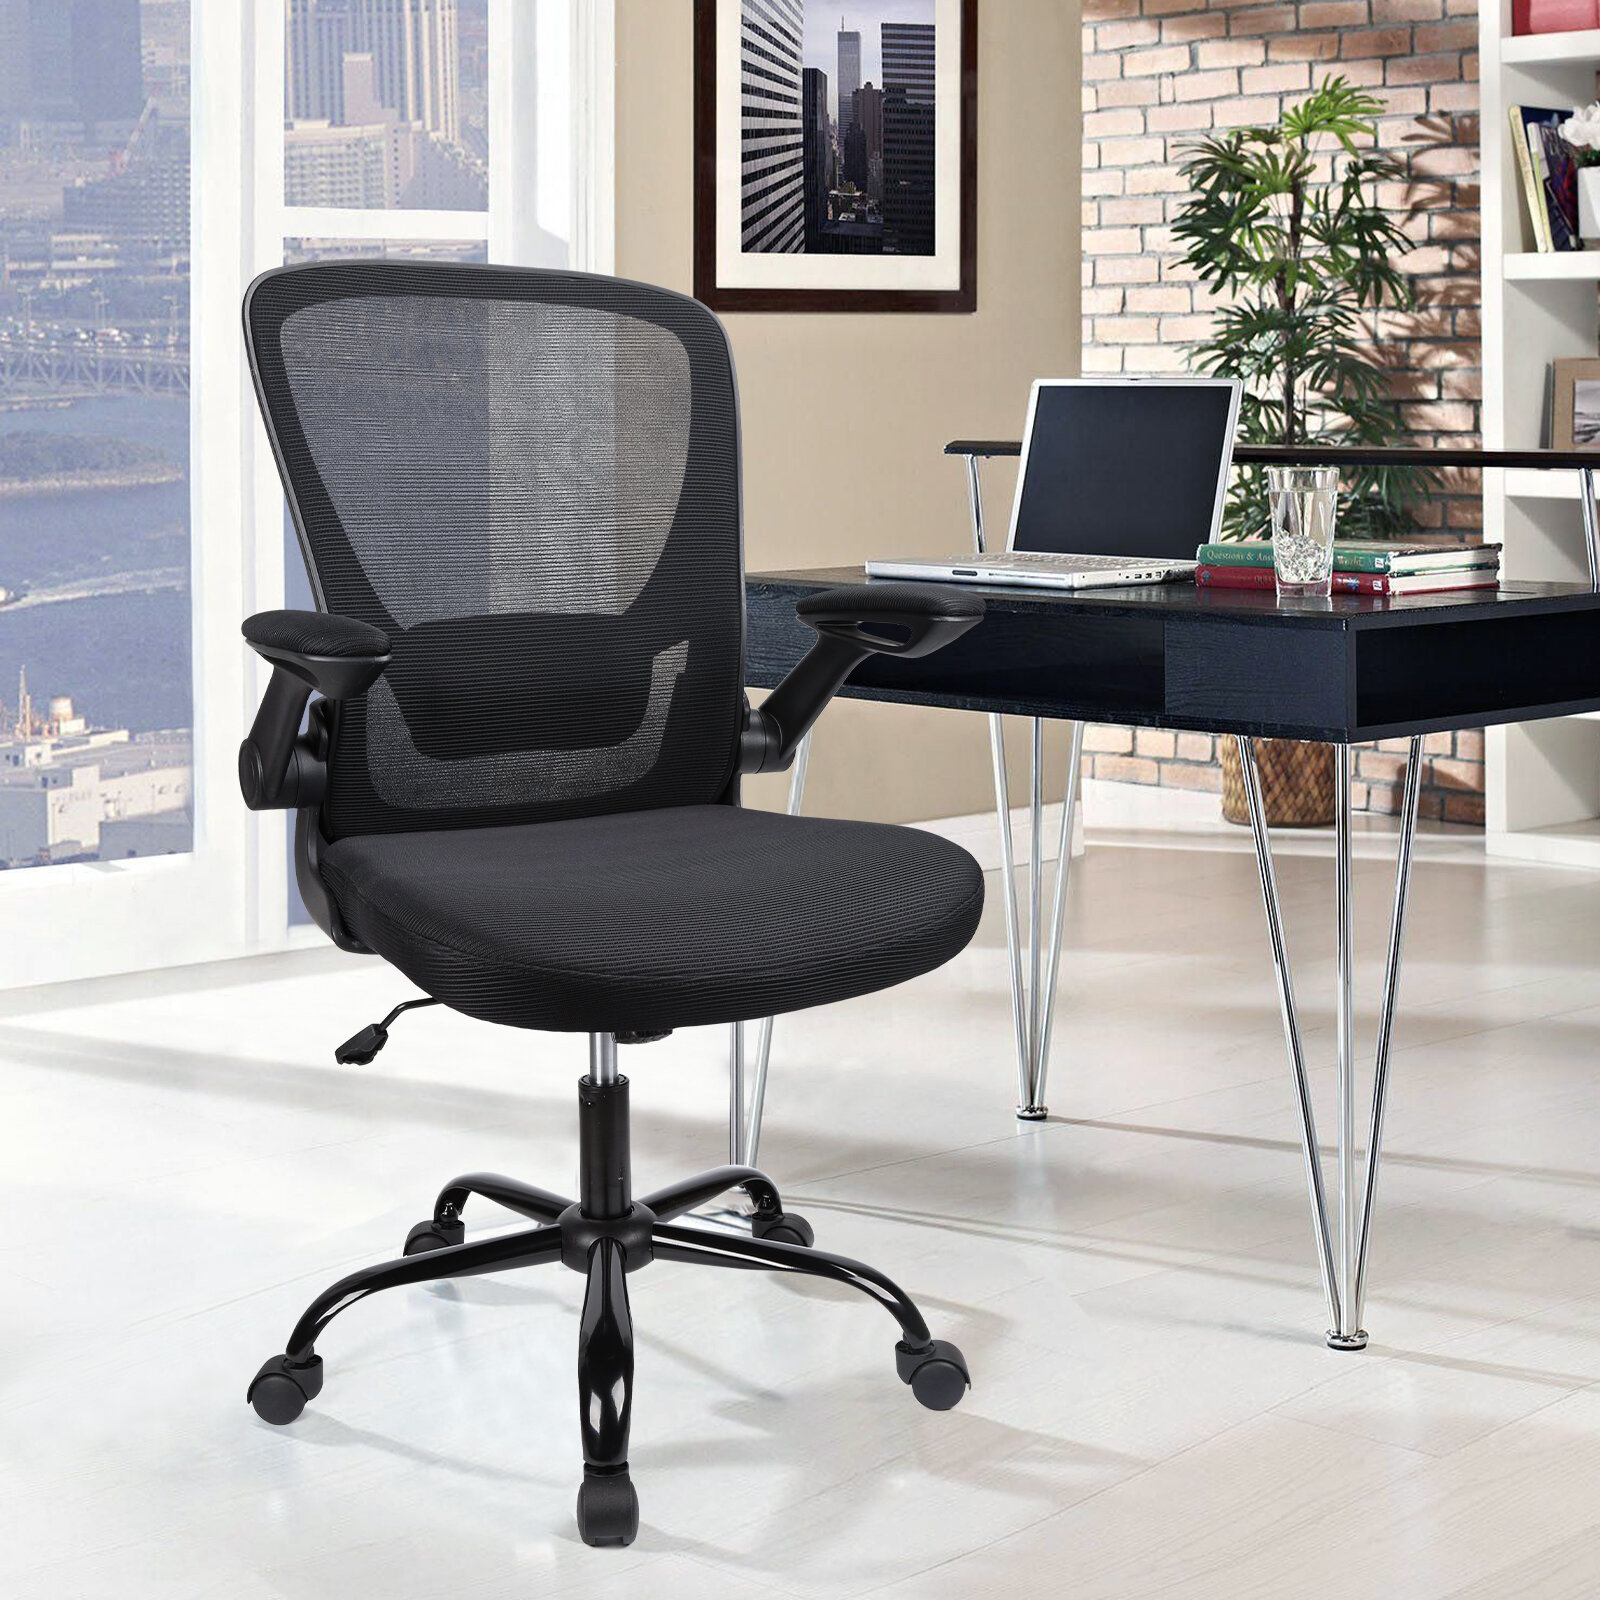 Office Chair Black,Computer Desk Chair Ergonomic Office Chair with Arm Home Office Tiltable Swivel Mesh Chair Comfy Padded Desk Chair